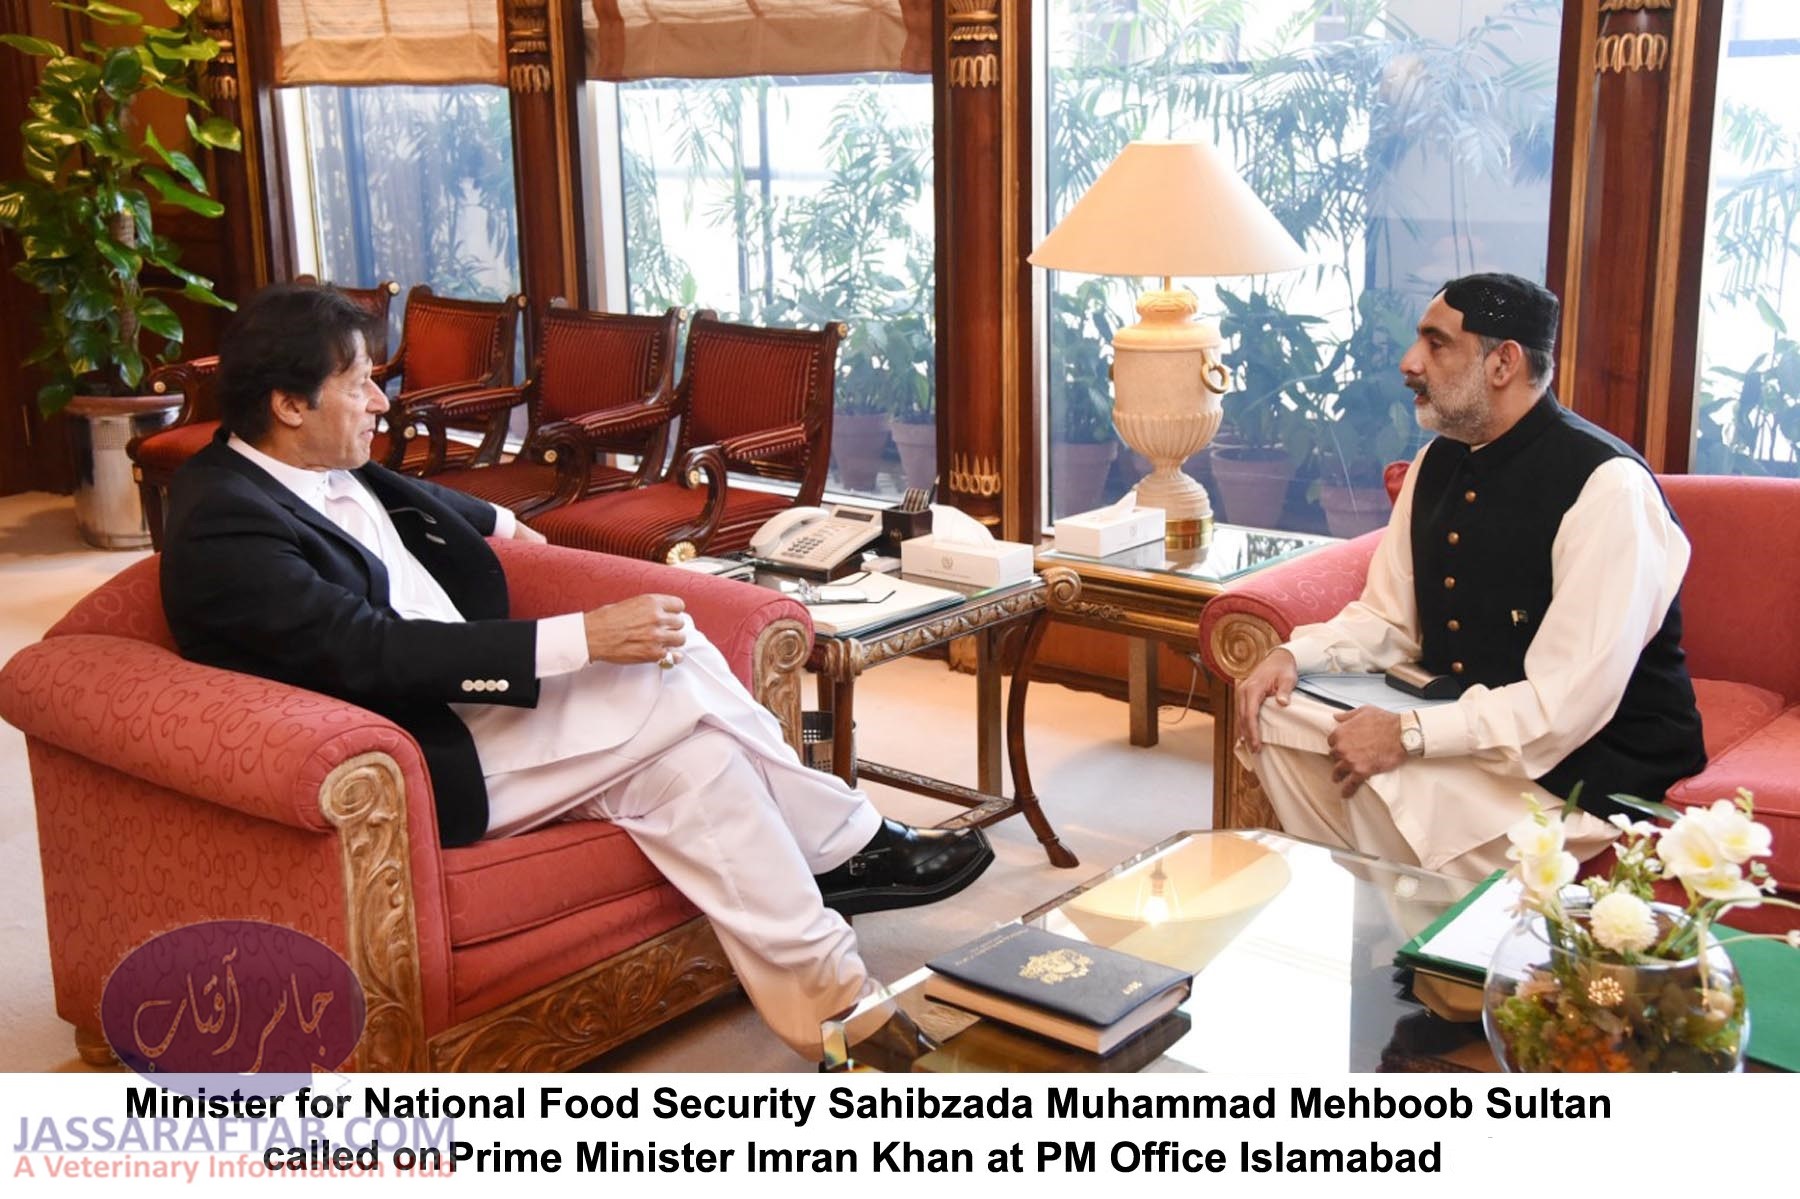 Minister for National Food Security Sahibzada Muhammad Mehboob Sultan called on Prime Minister Imran Khan at PM Office Islamabad